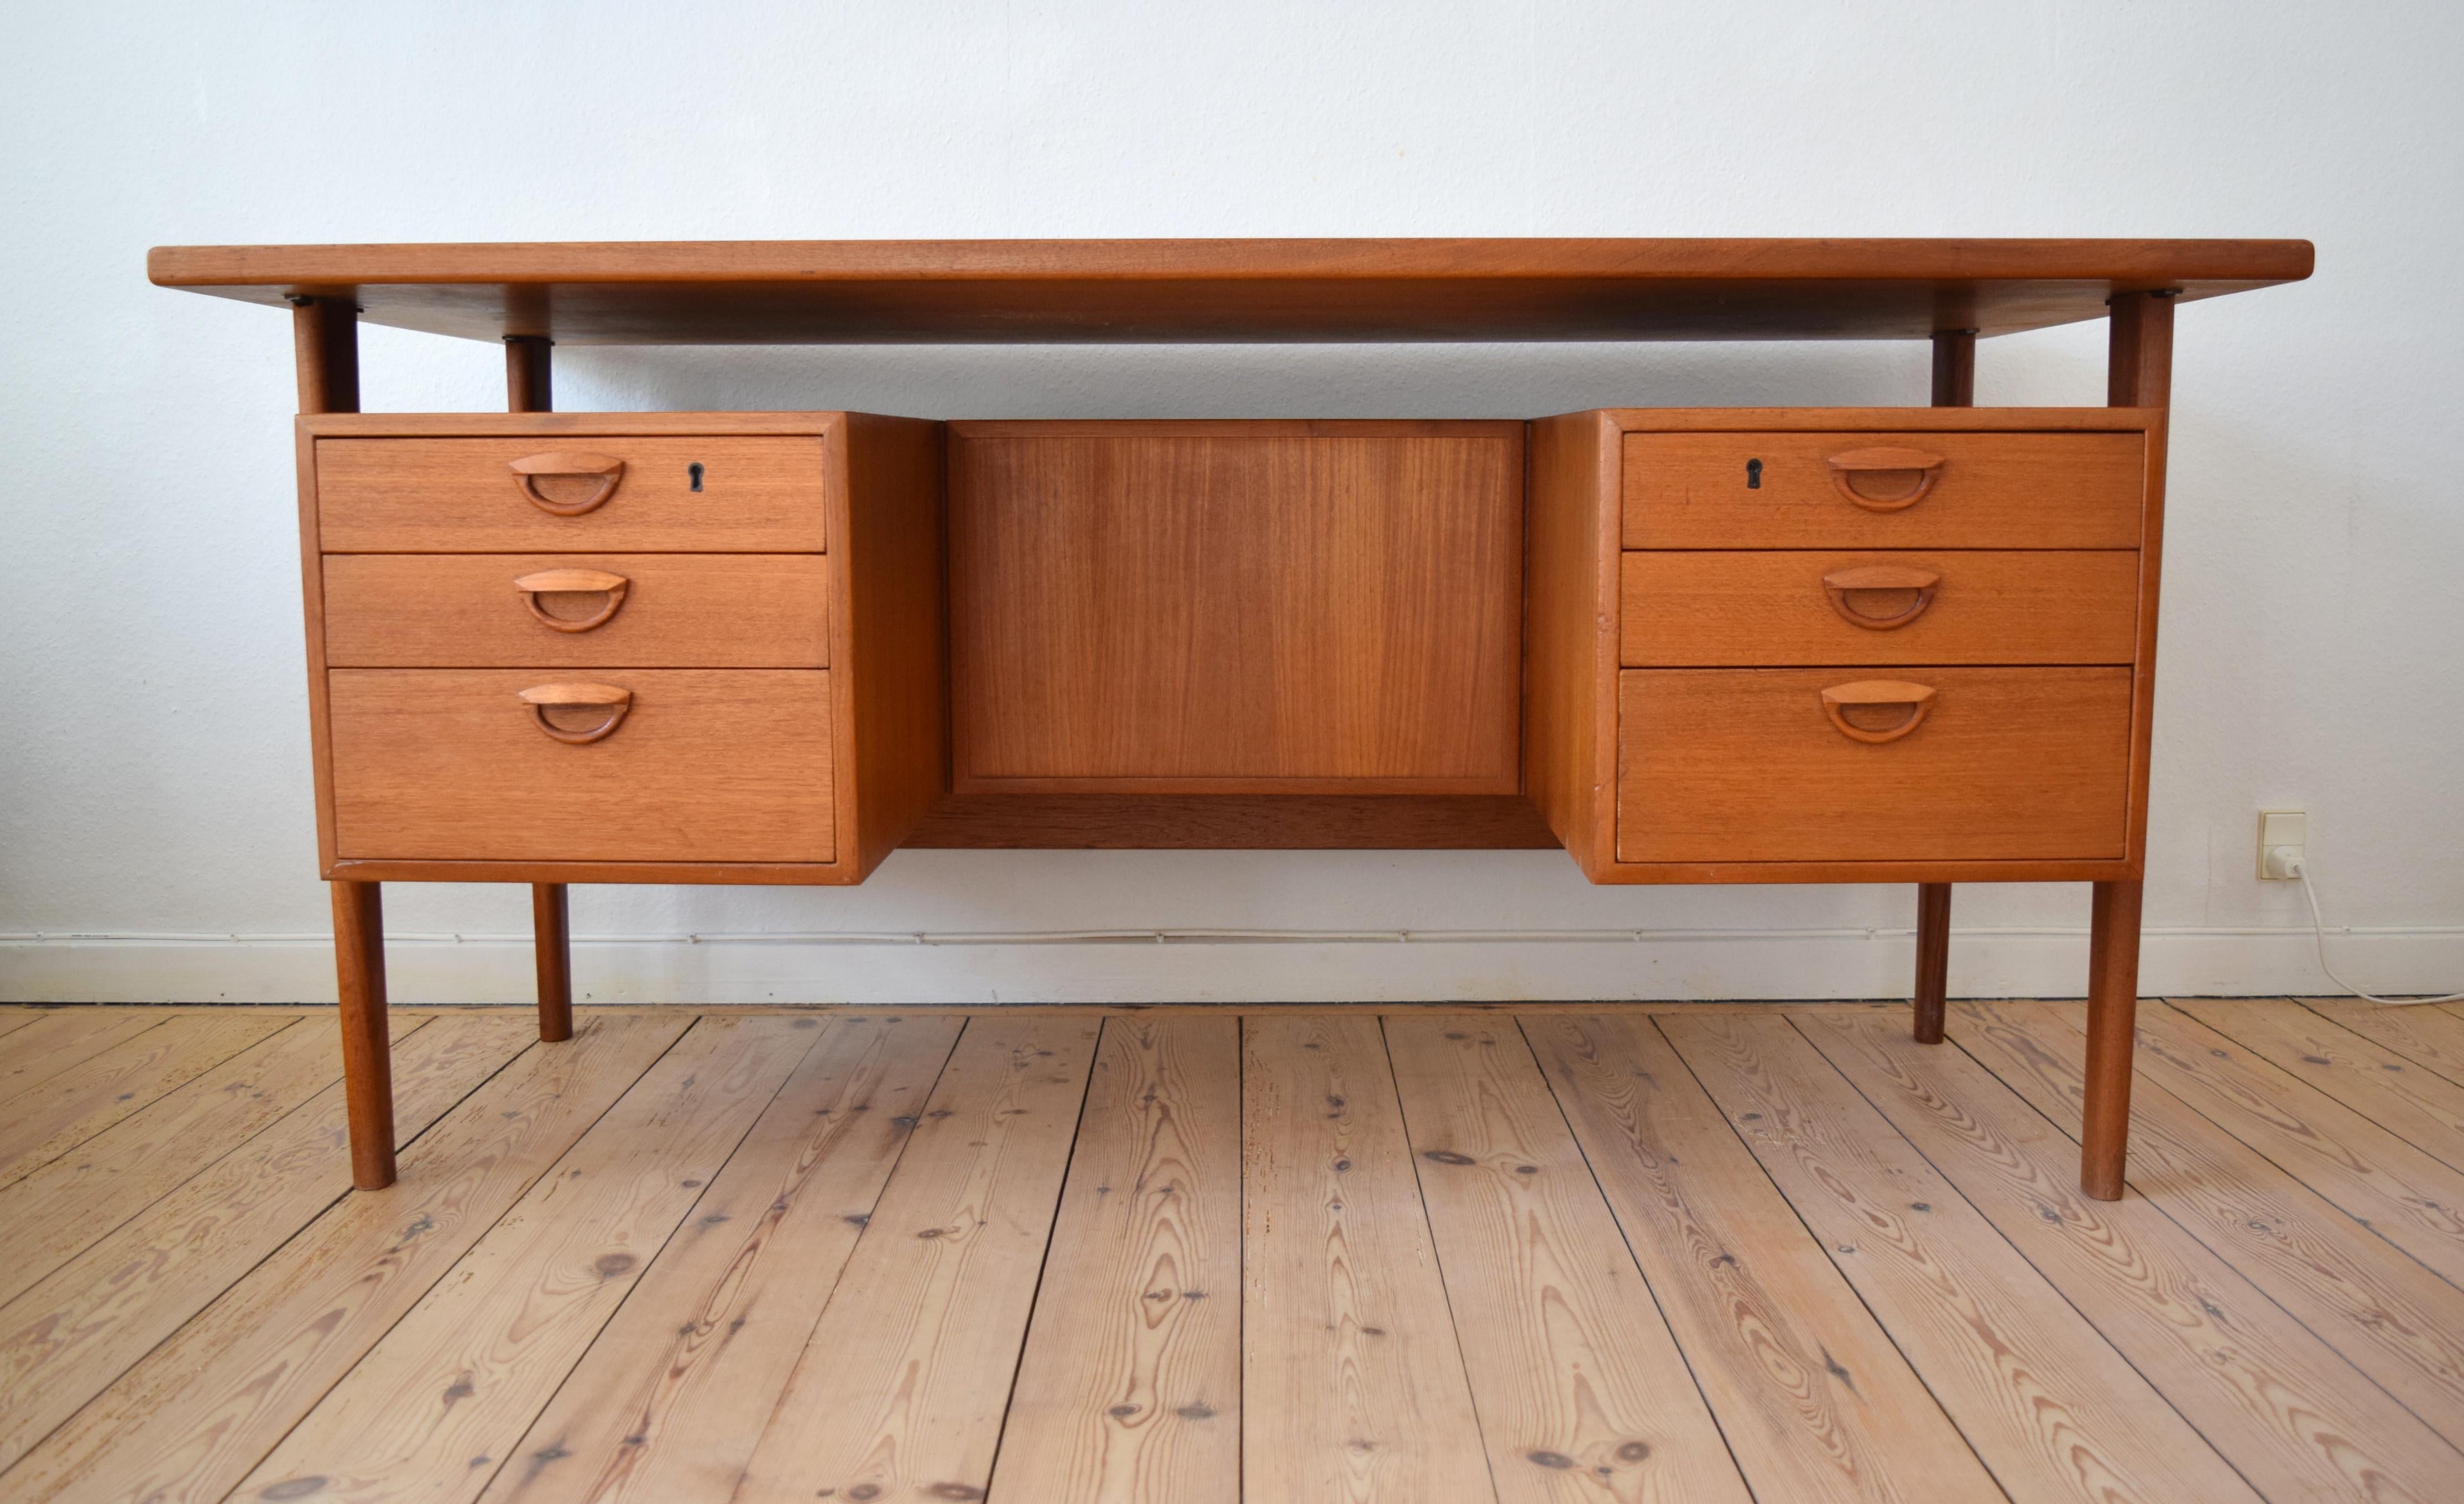 Danish executive teak desk designed by Kai Kristiansen by Feldballes Møbelfabrik as model FM60 in 1958. This freestanding desk features a floating top and six drawers (two lockable) on the front. There are also three compartments on the back. Carved